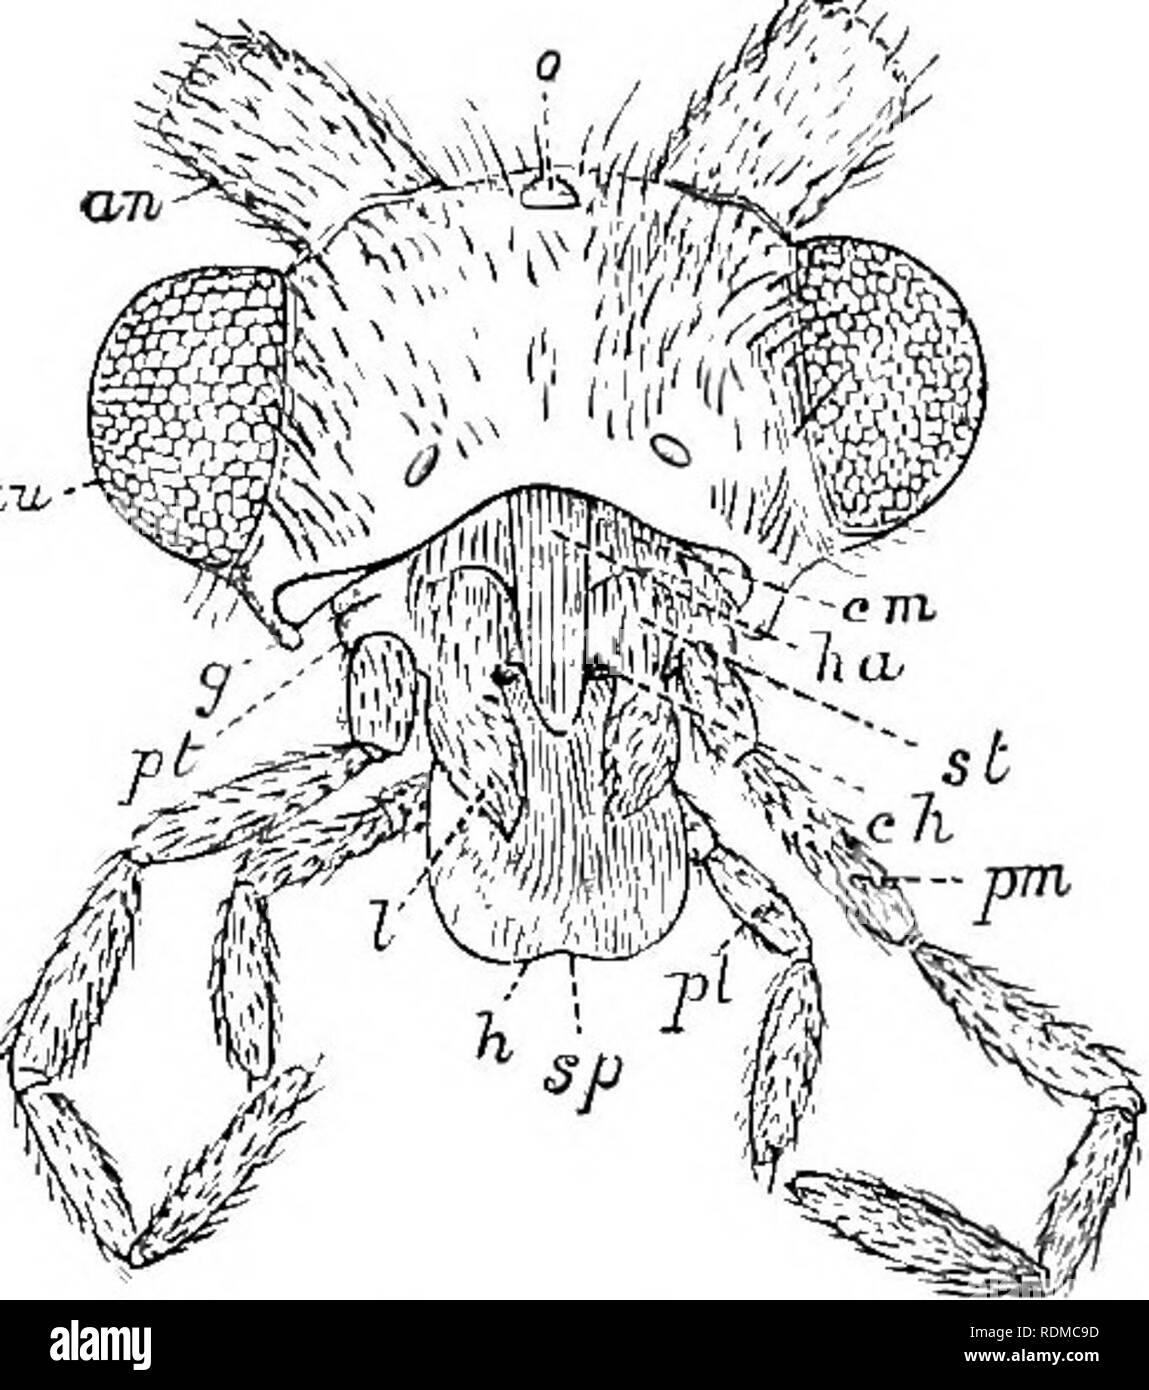 . The Cambridge natural history. Zoology. PHRYGANEIDAE 475 is large, but is nearly perpendicular in direction, and is much concealed by the elongate, free front coxae, which repose against it. The metathorax is intermediate in size between the pro- and meso-thorax ; its side-pieces are rather large, but the sternum is membranous, with a heart-shaped piece of more chitinous consist- ence in the middle, entirely covered by the middle coxae. The side-pieces both of the meso- and meta-thorax are large, and are closely connected; the middle and posterior coxae are very large, elongate, and prominen Stock Photo